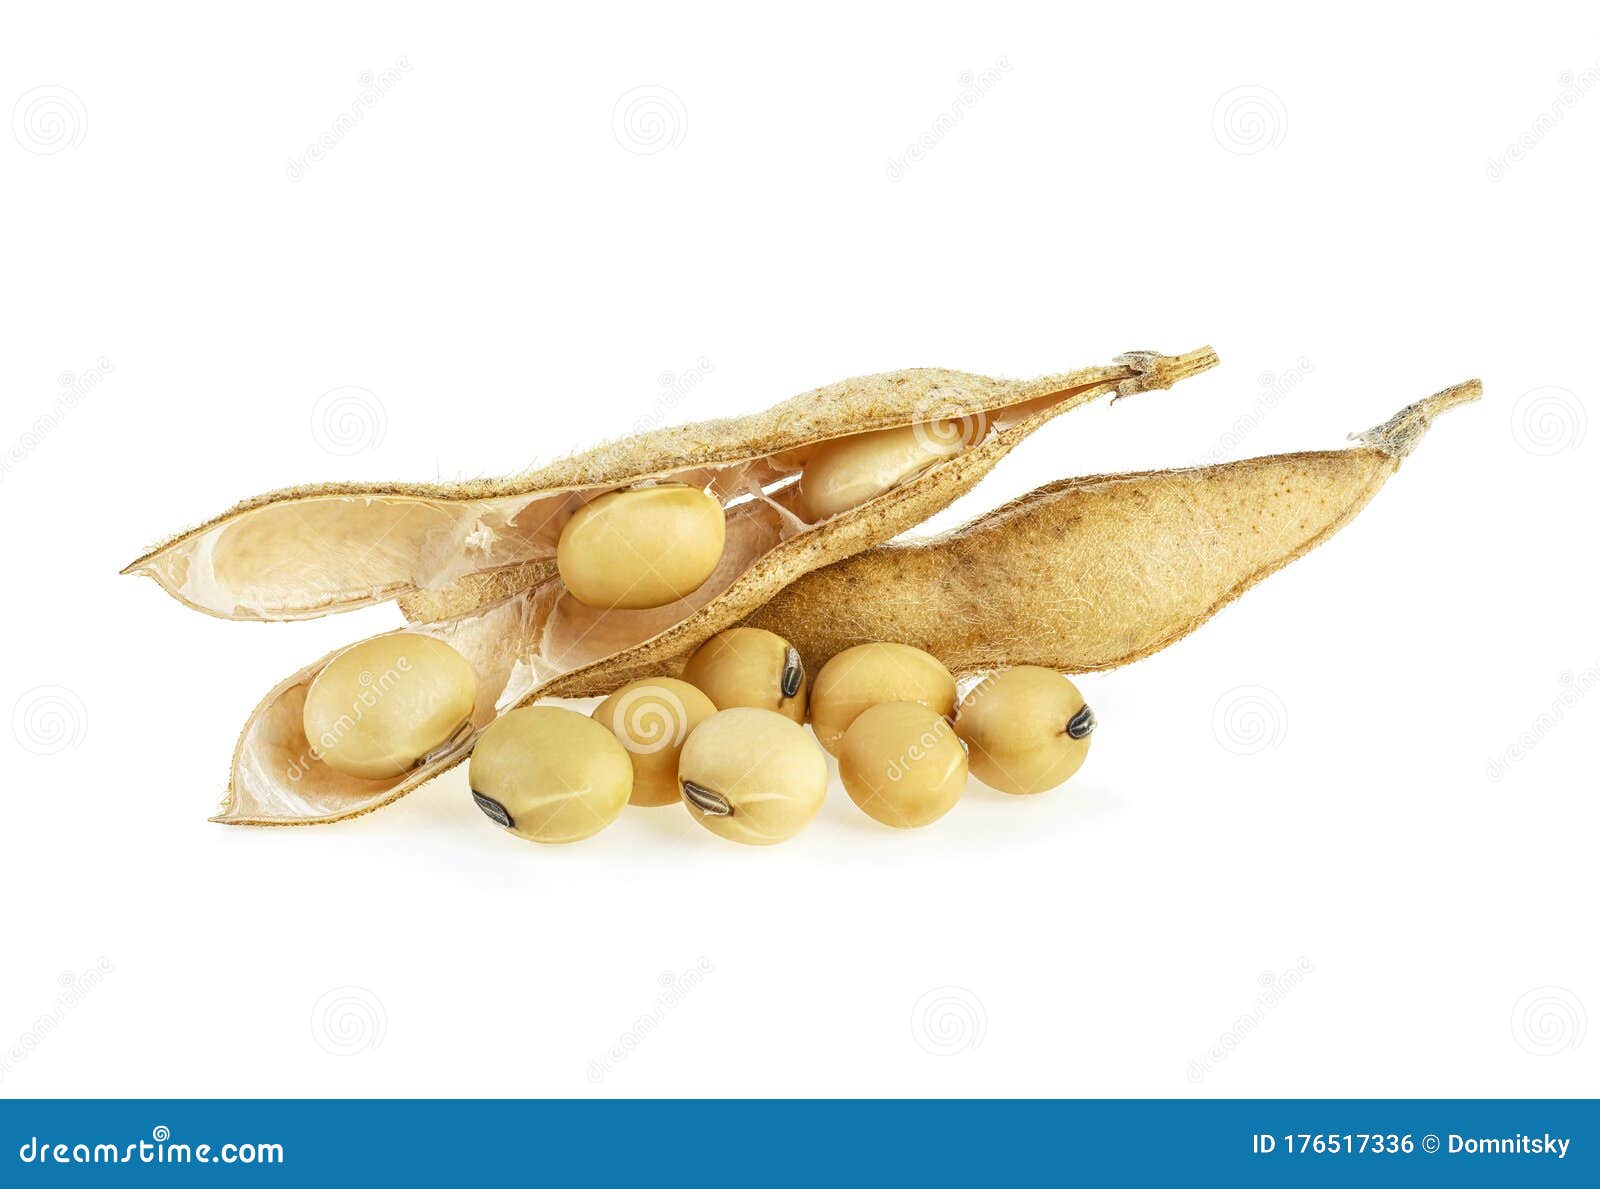 Soybeans and Soy Pods Isolated on White Background Stock Photo - Image ...